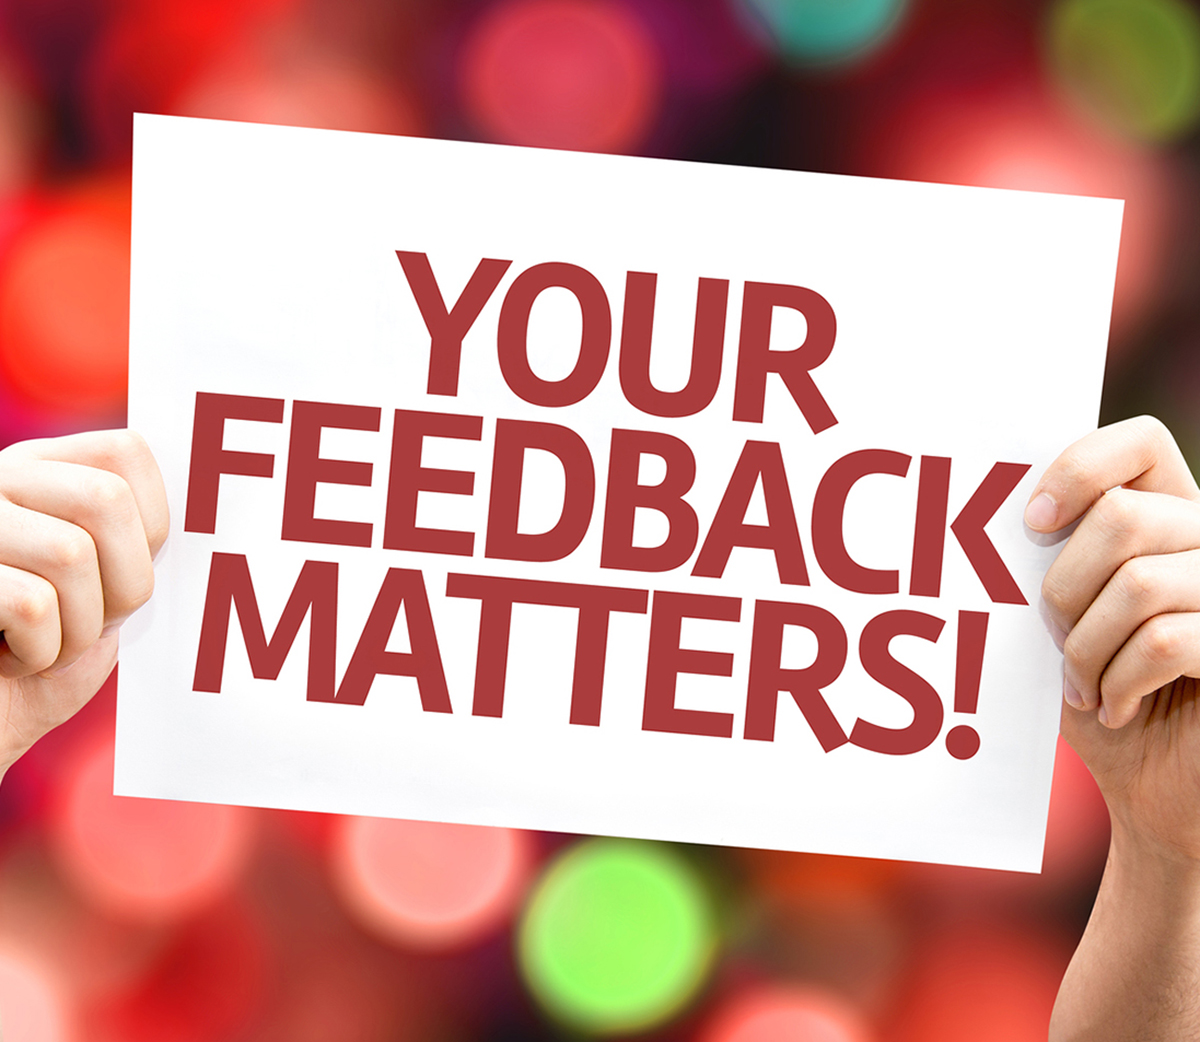 Your Feedback Matters card with colorful background with defocus